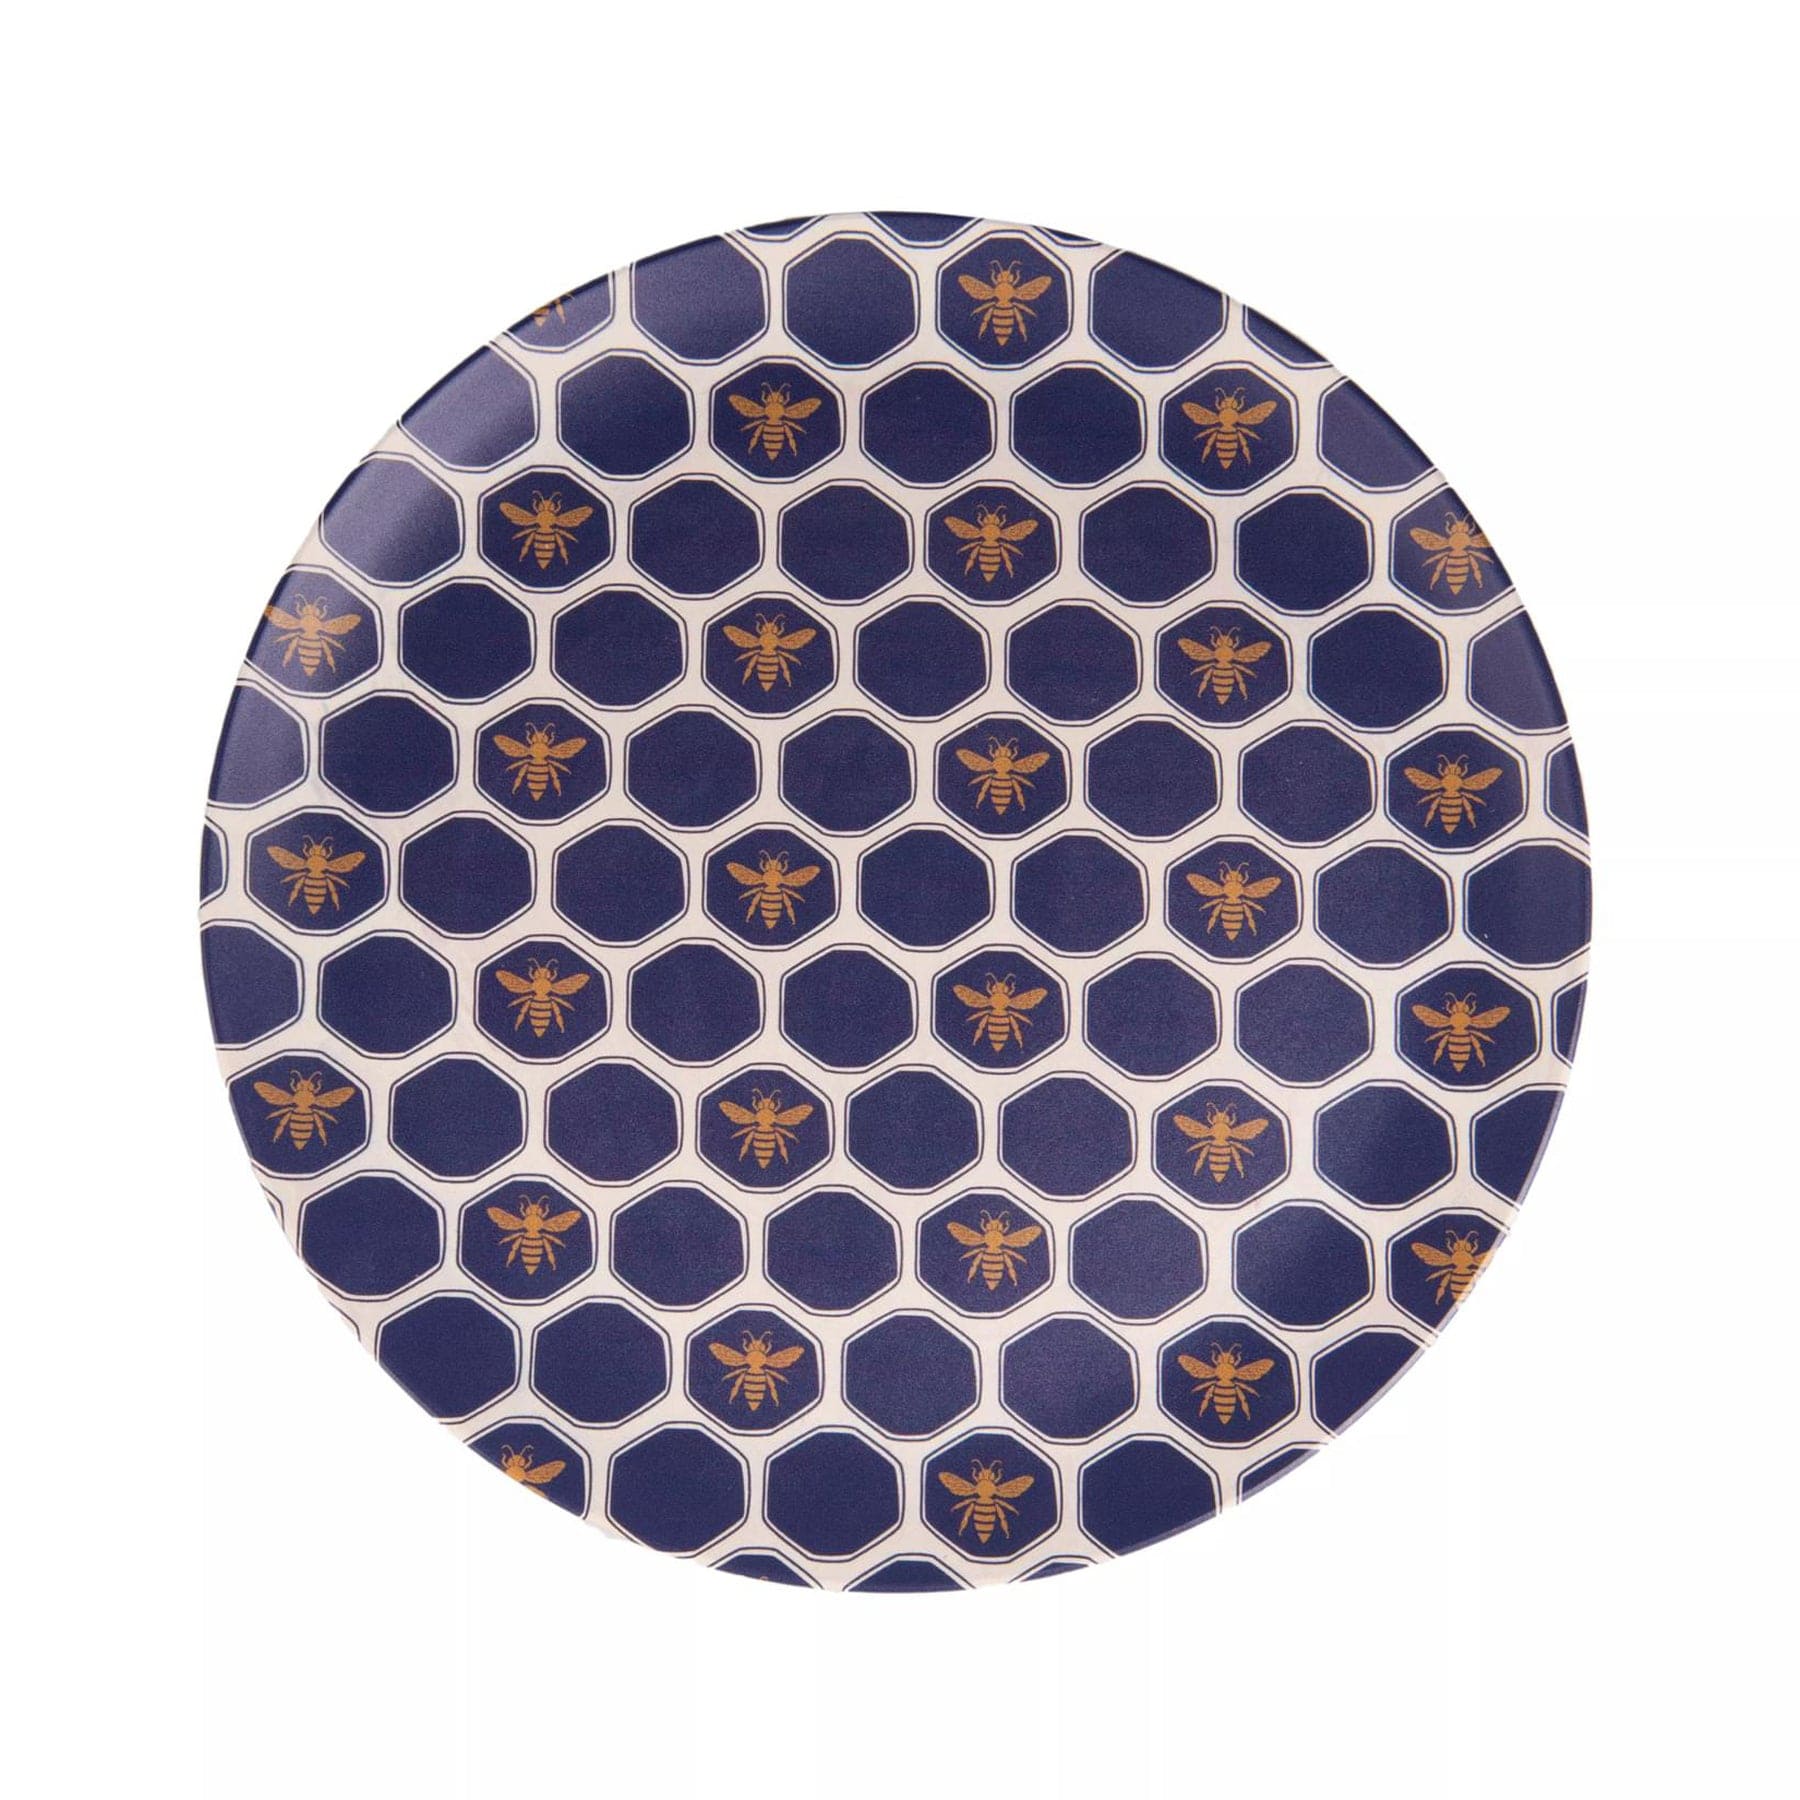 Round blue and gold patterned plate with hexagonal shapes and bee motifs on a white background.